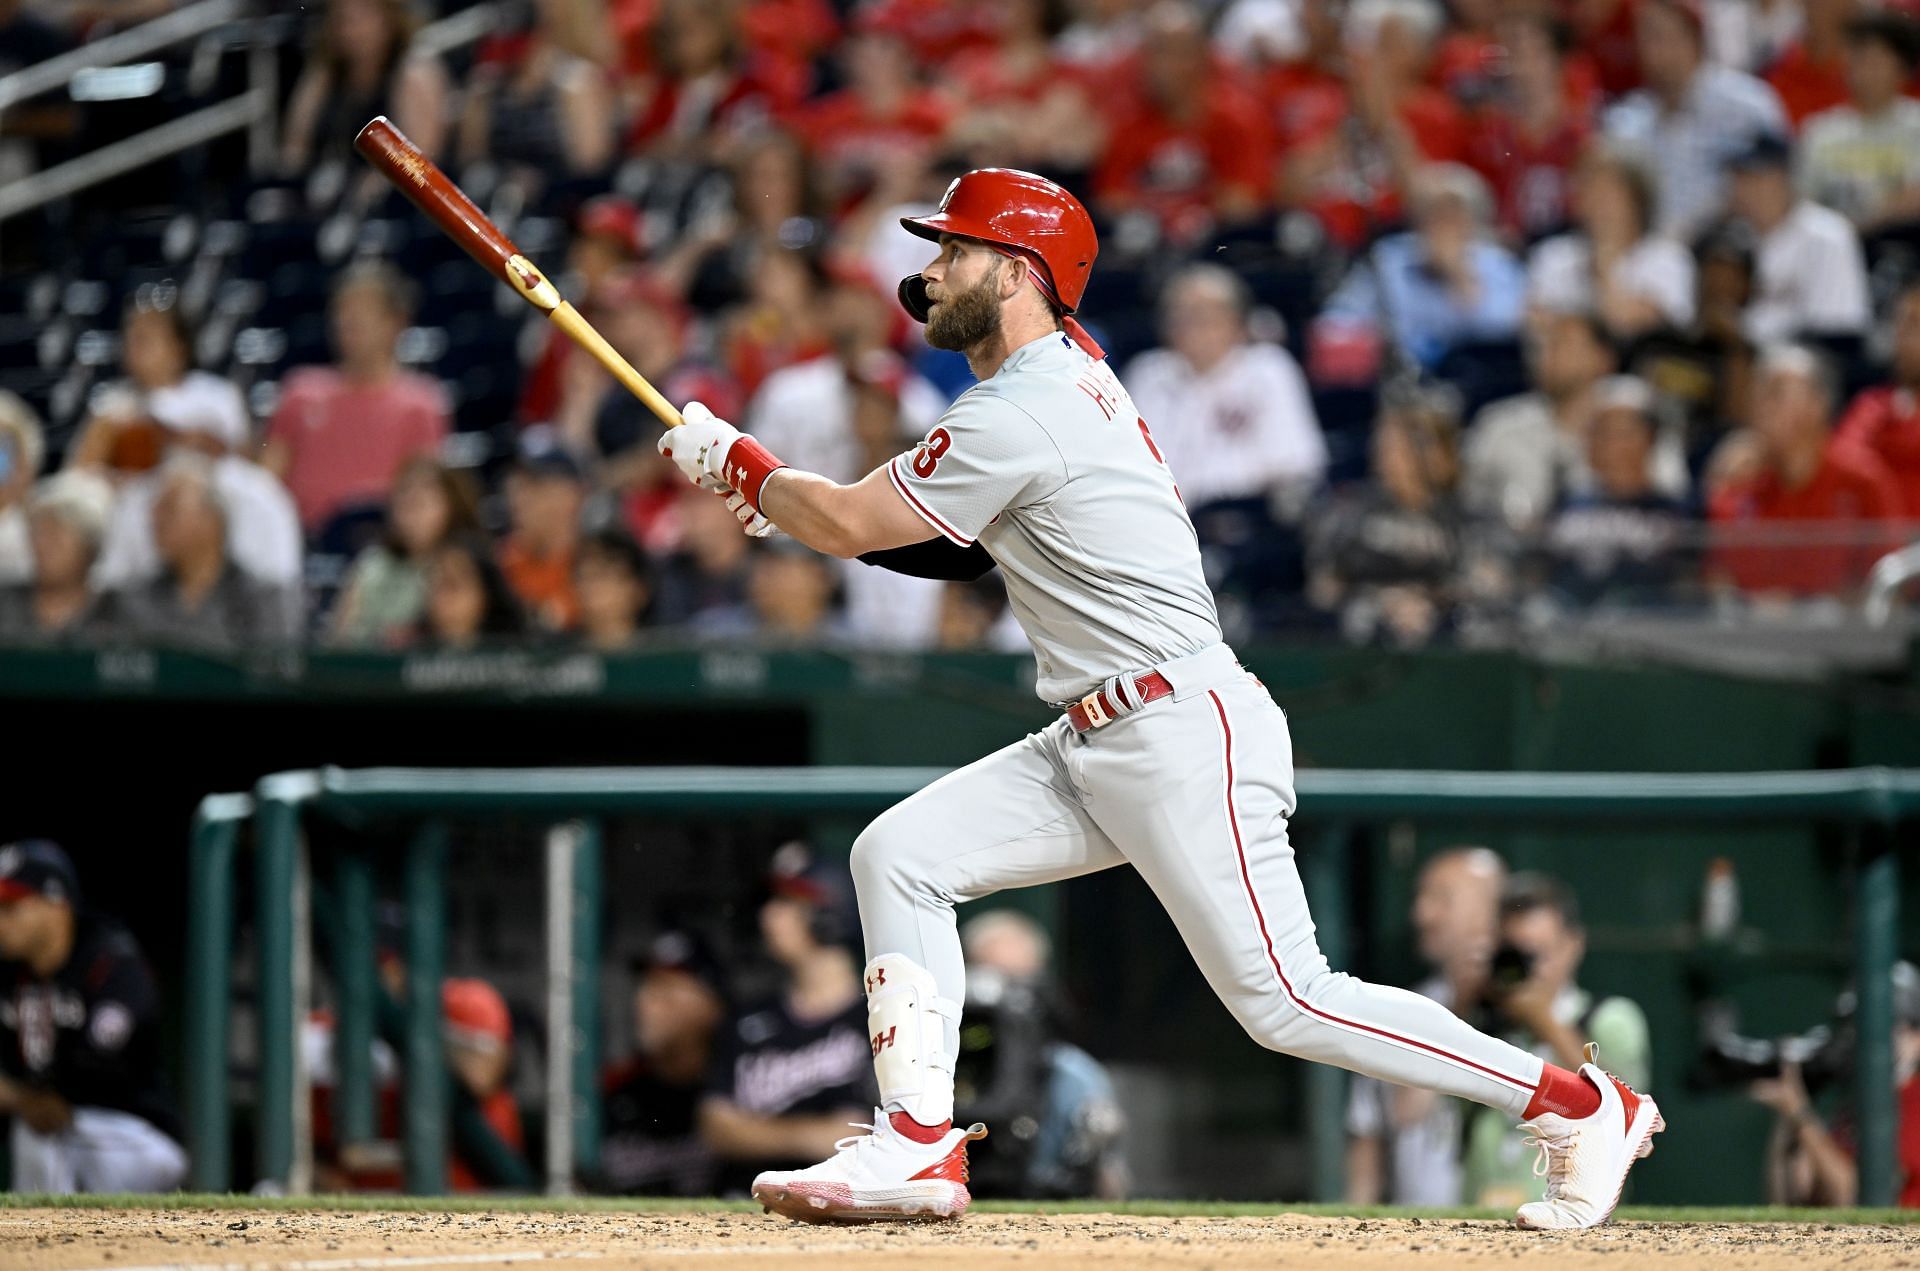 Bryce Harper of the Philadelphia Phillies drives in two runs with a double in the eighth inning against the Washington Nationals.